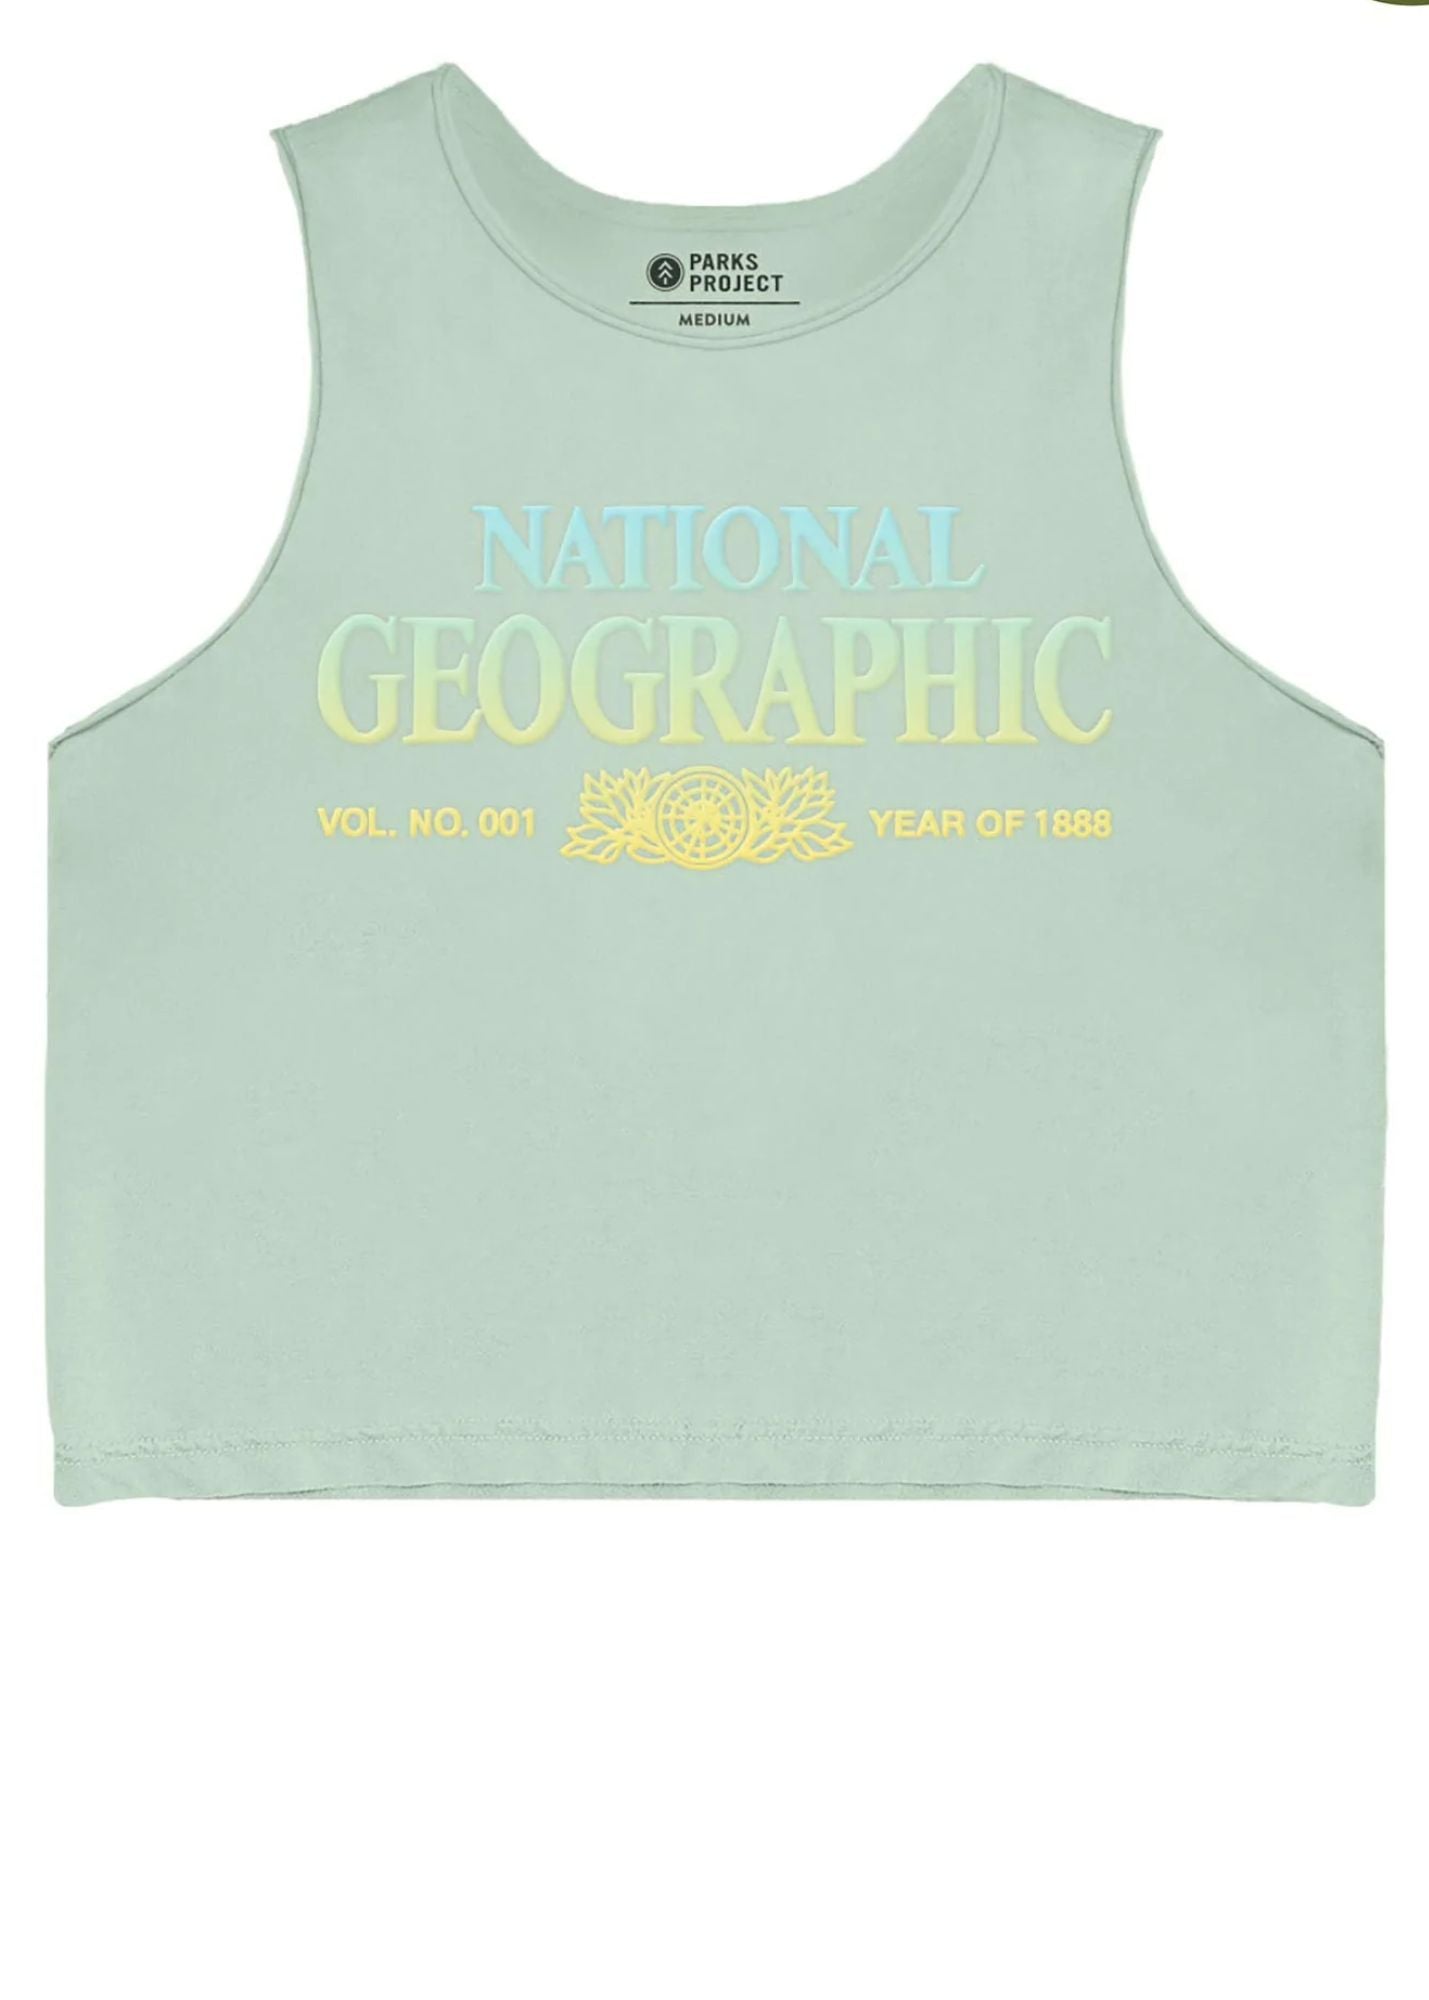 Shirts National Geographic x Parks Project Legacy Puffy Print Organic Tank Parks Project